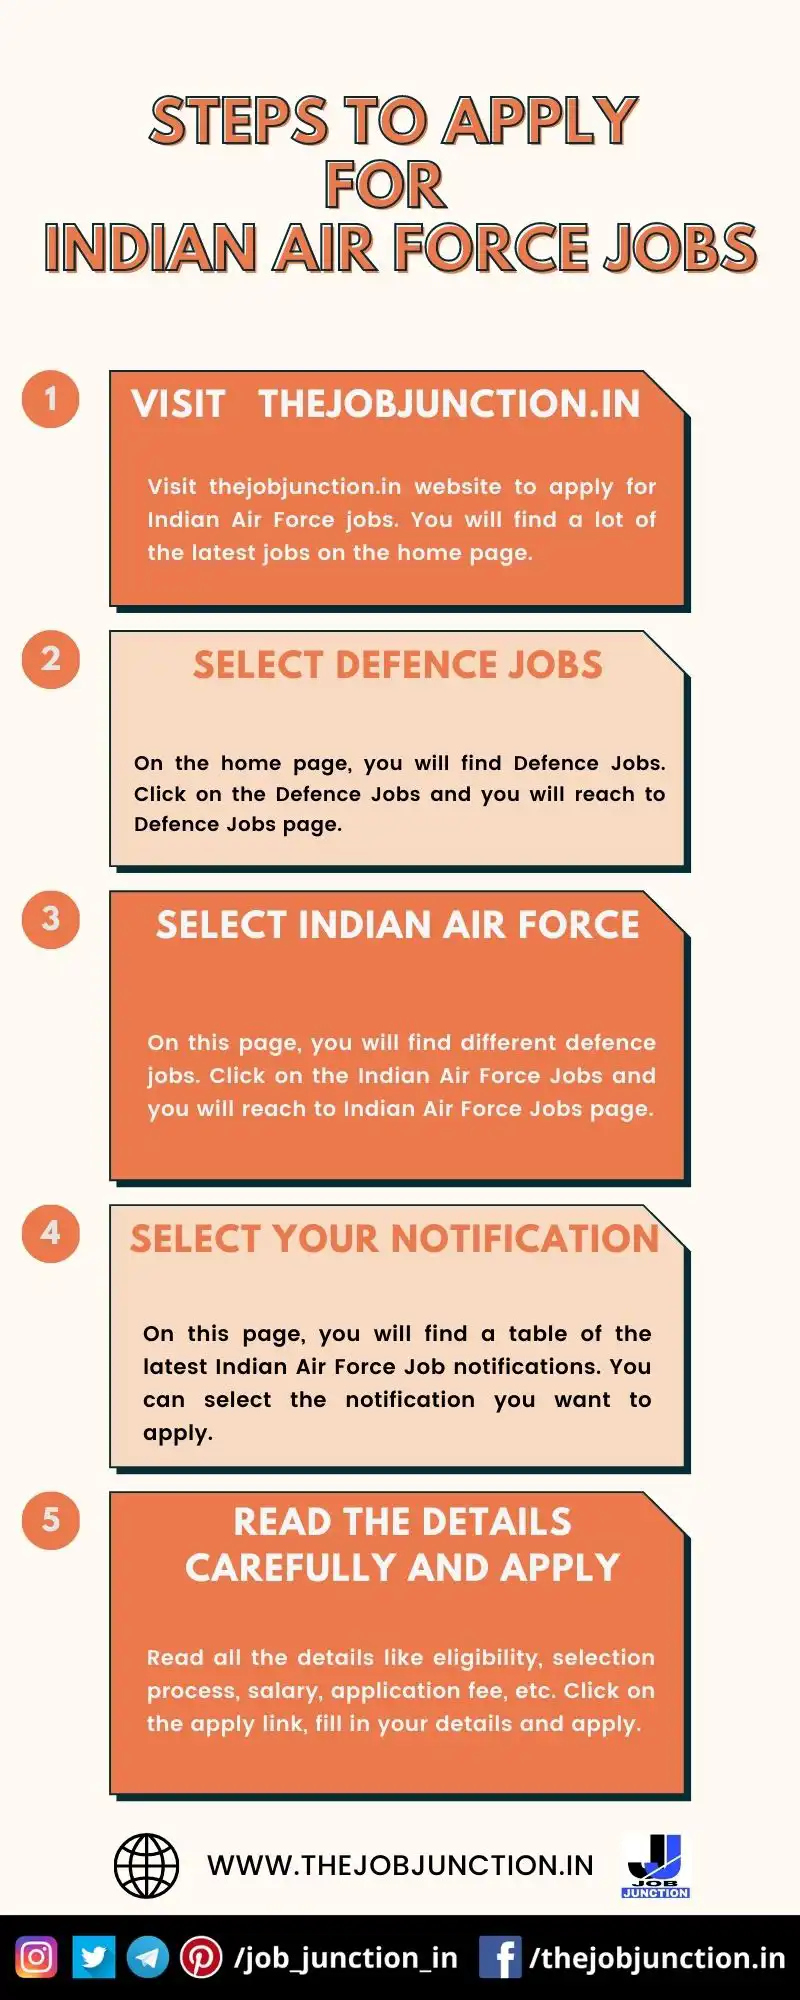 STEPS TO APPLY FOR INDIAN AIR FORCE JOBS